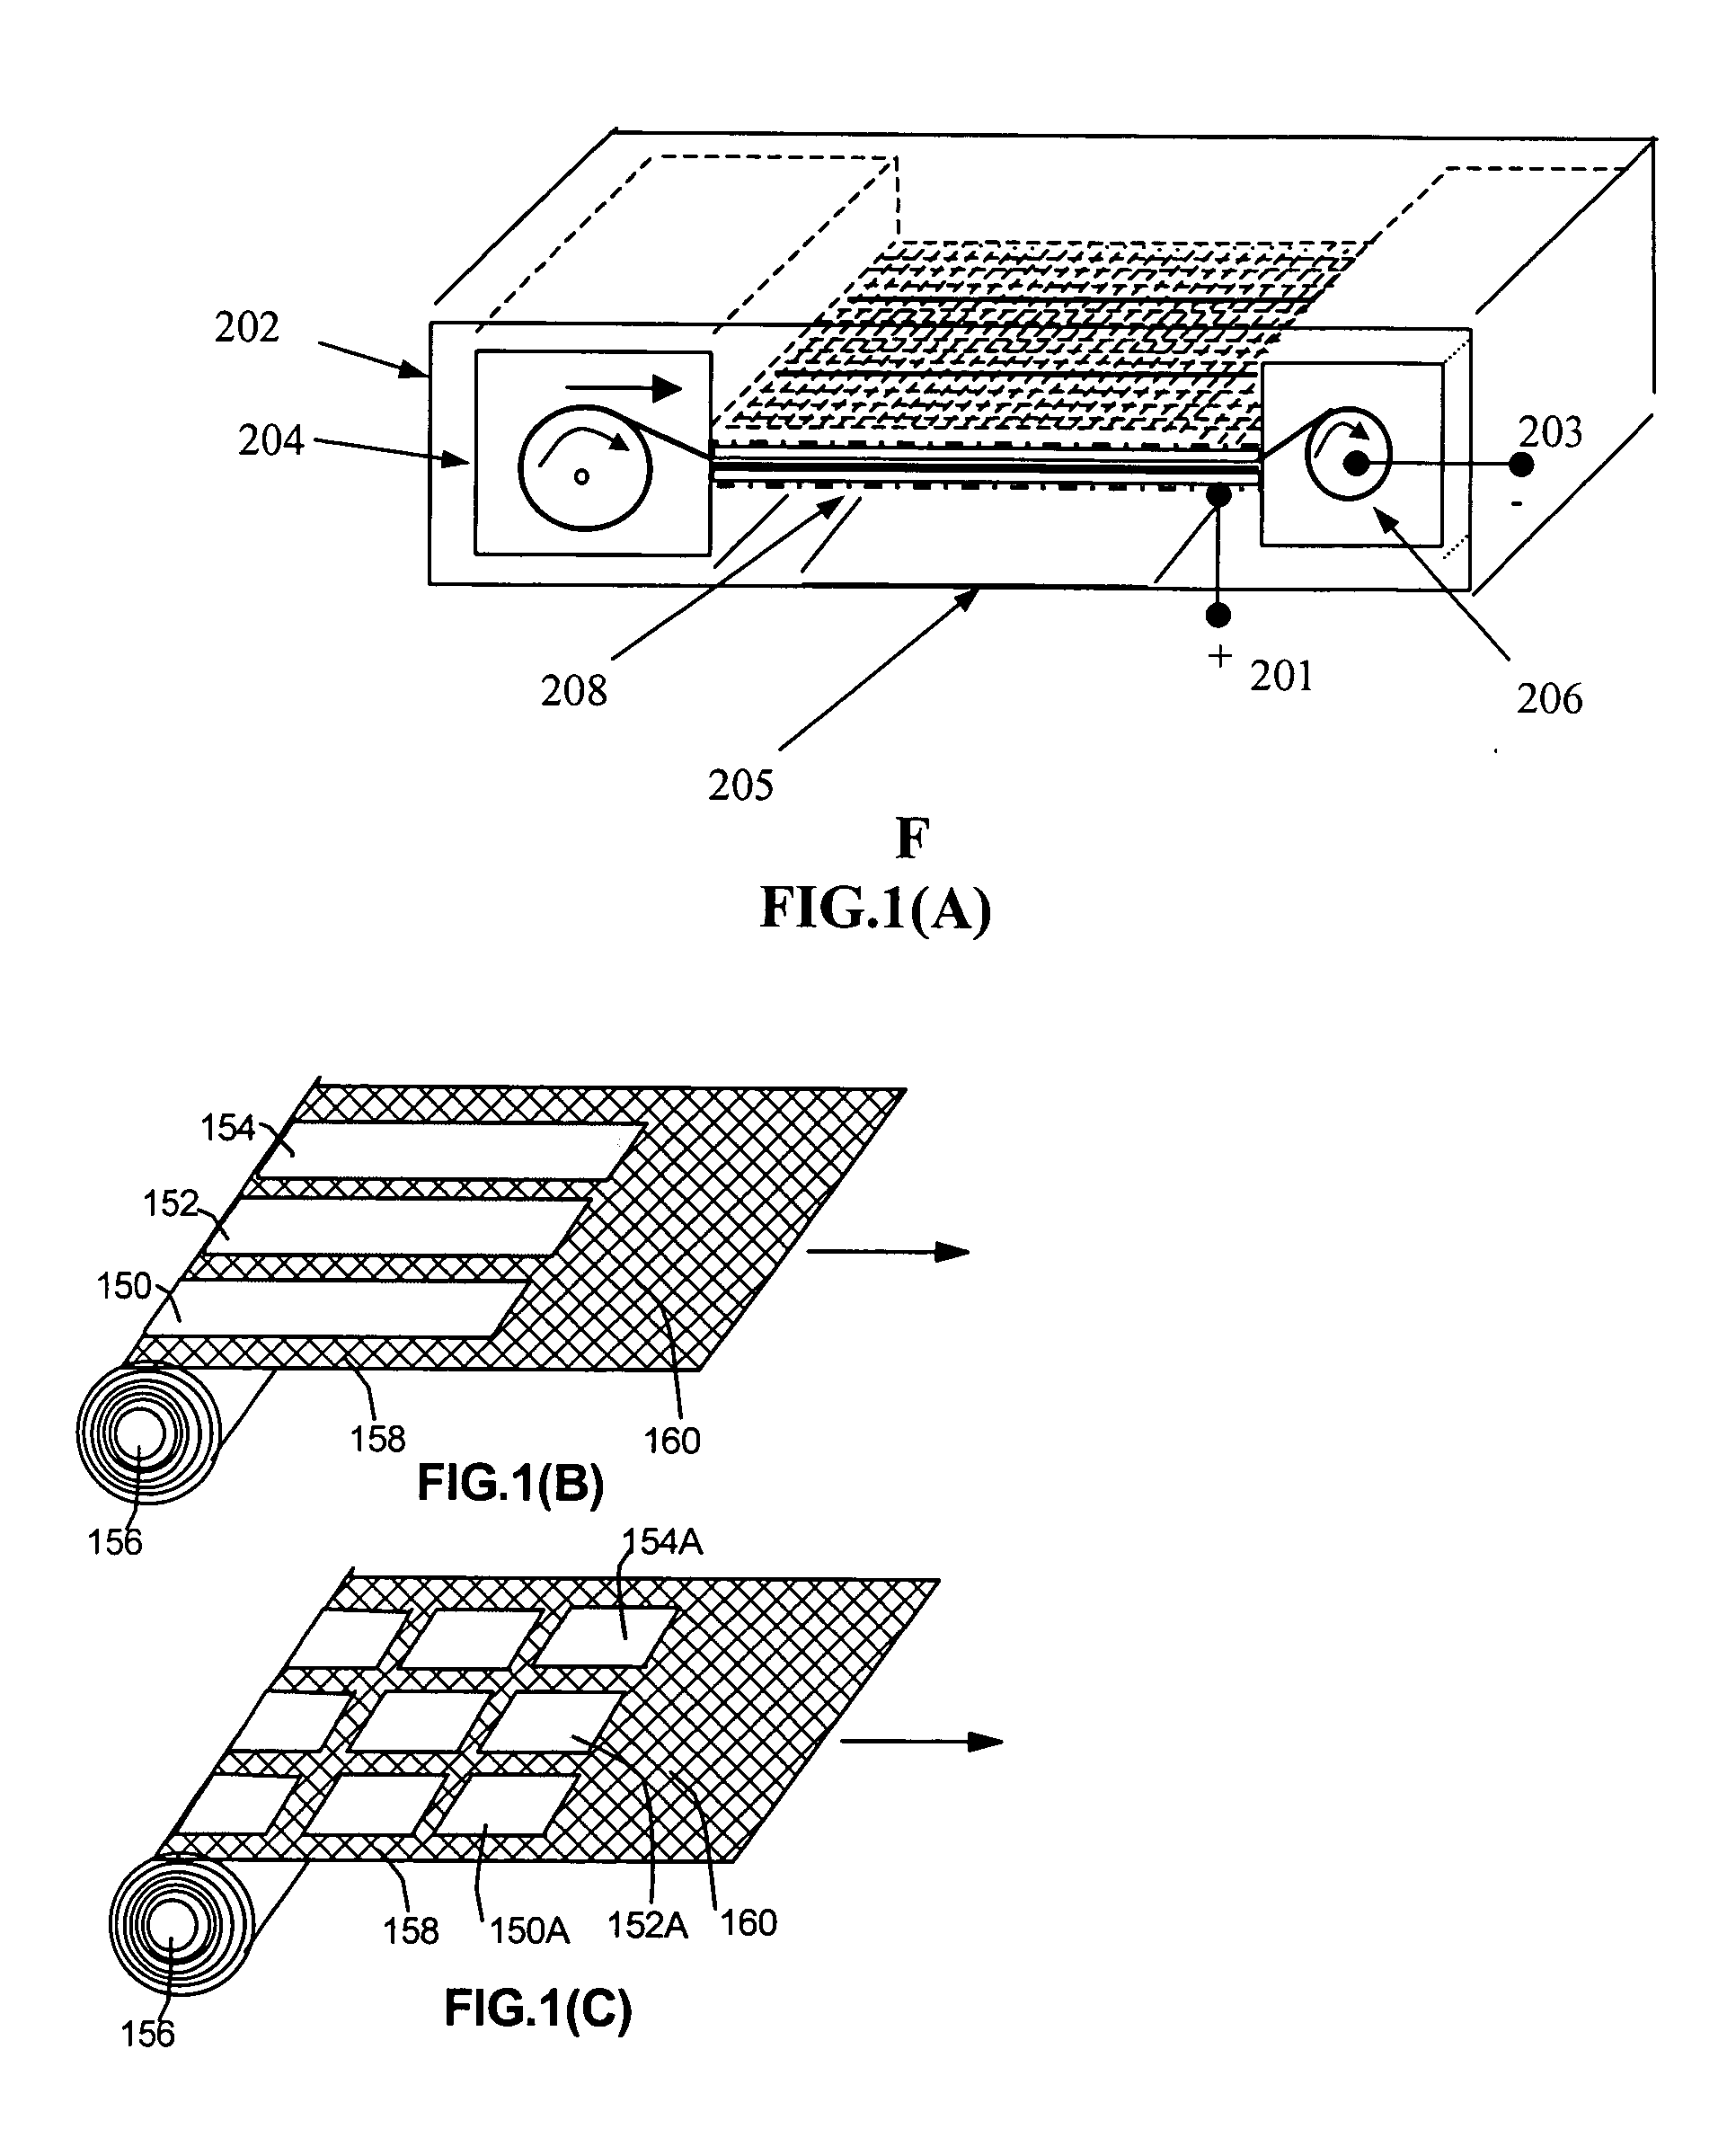 Actively controlled metal-air battery and method for operating same